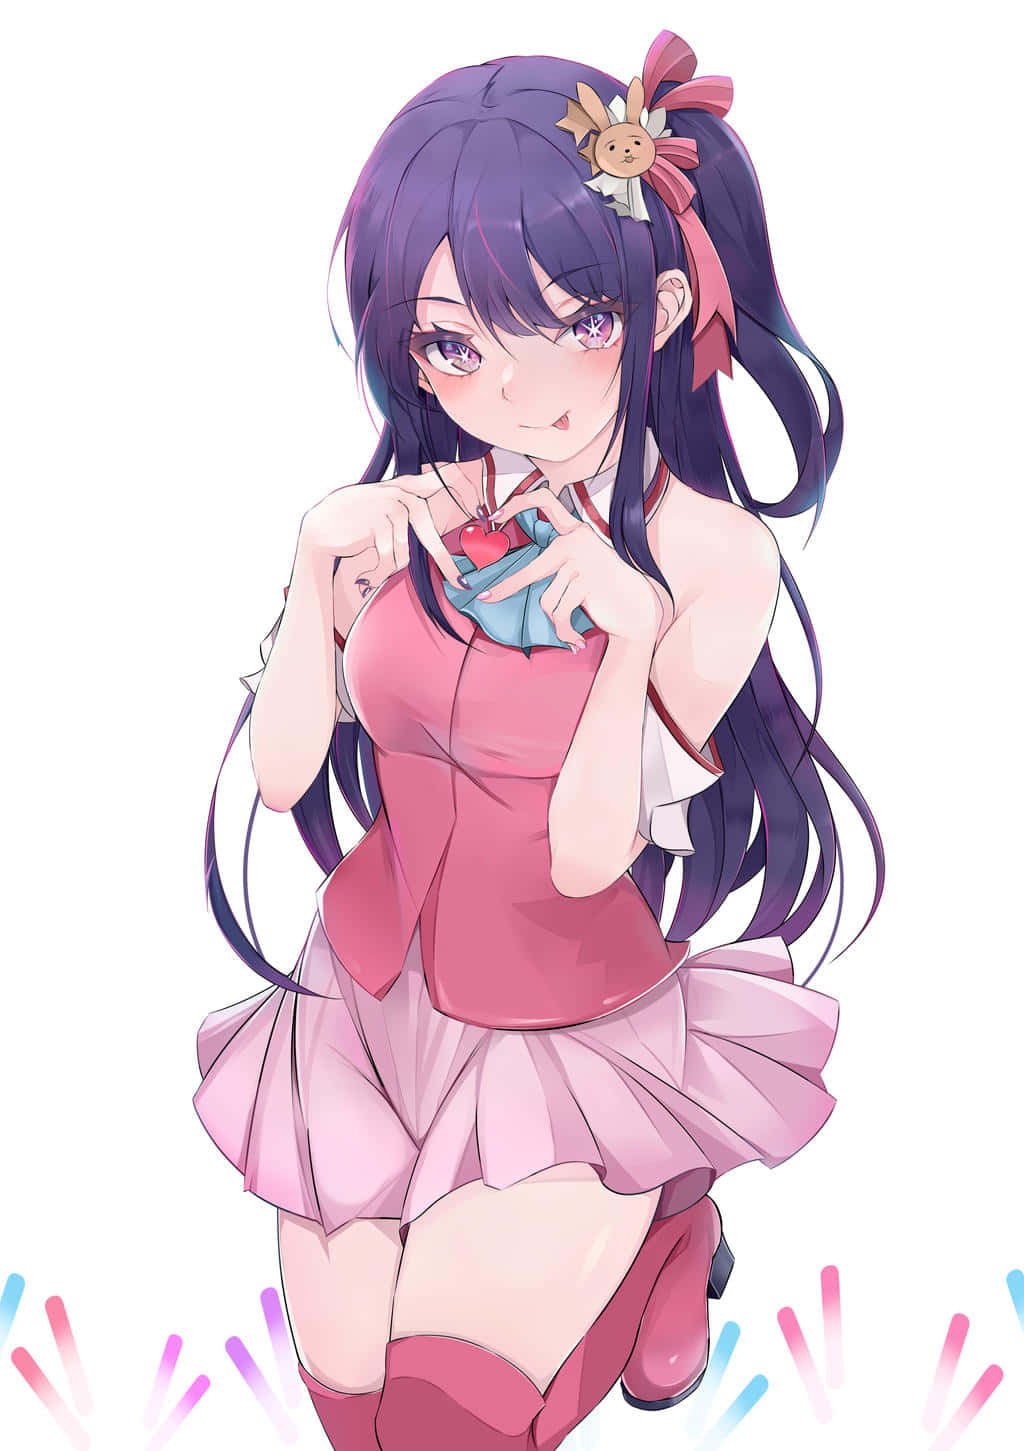 Purple Haired Anime Girlwith Heart Gesture Wallpaper